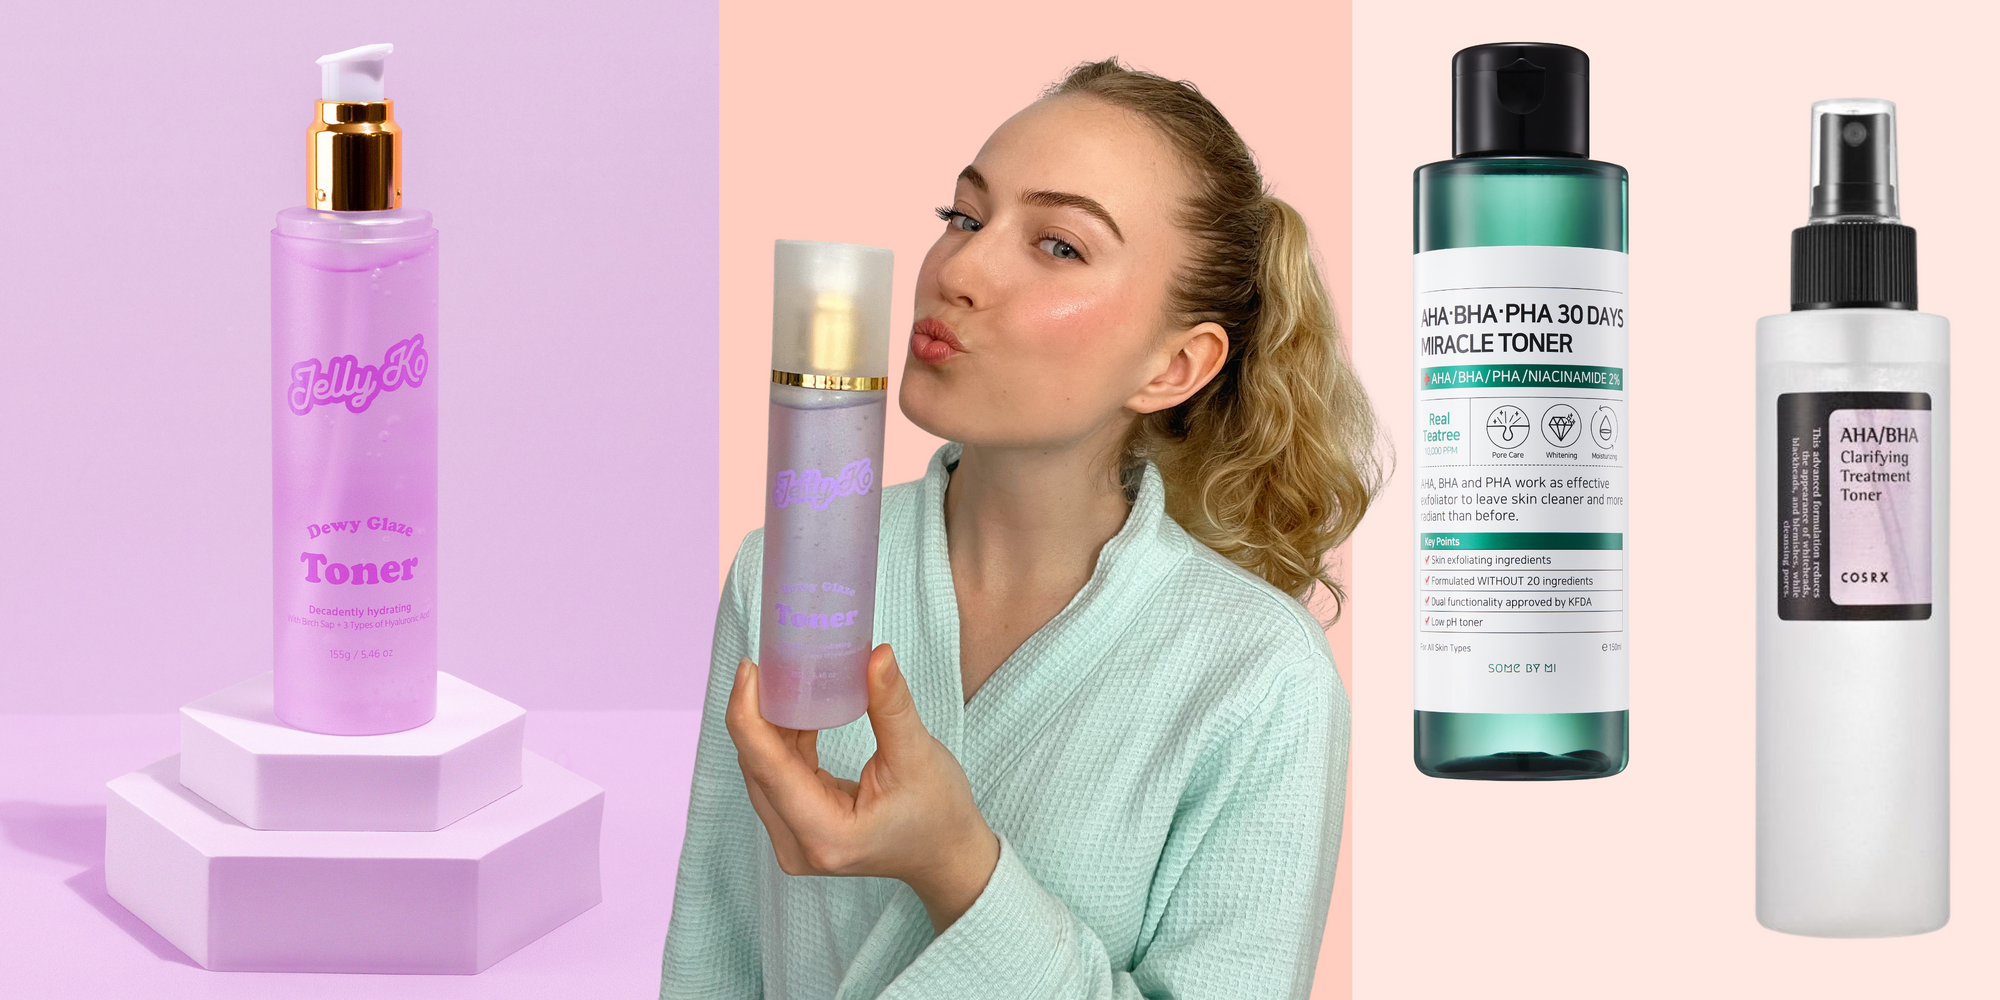 Do You Apply Toner To A Wet Face Or A Dry Face?